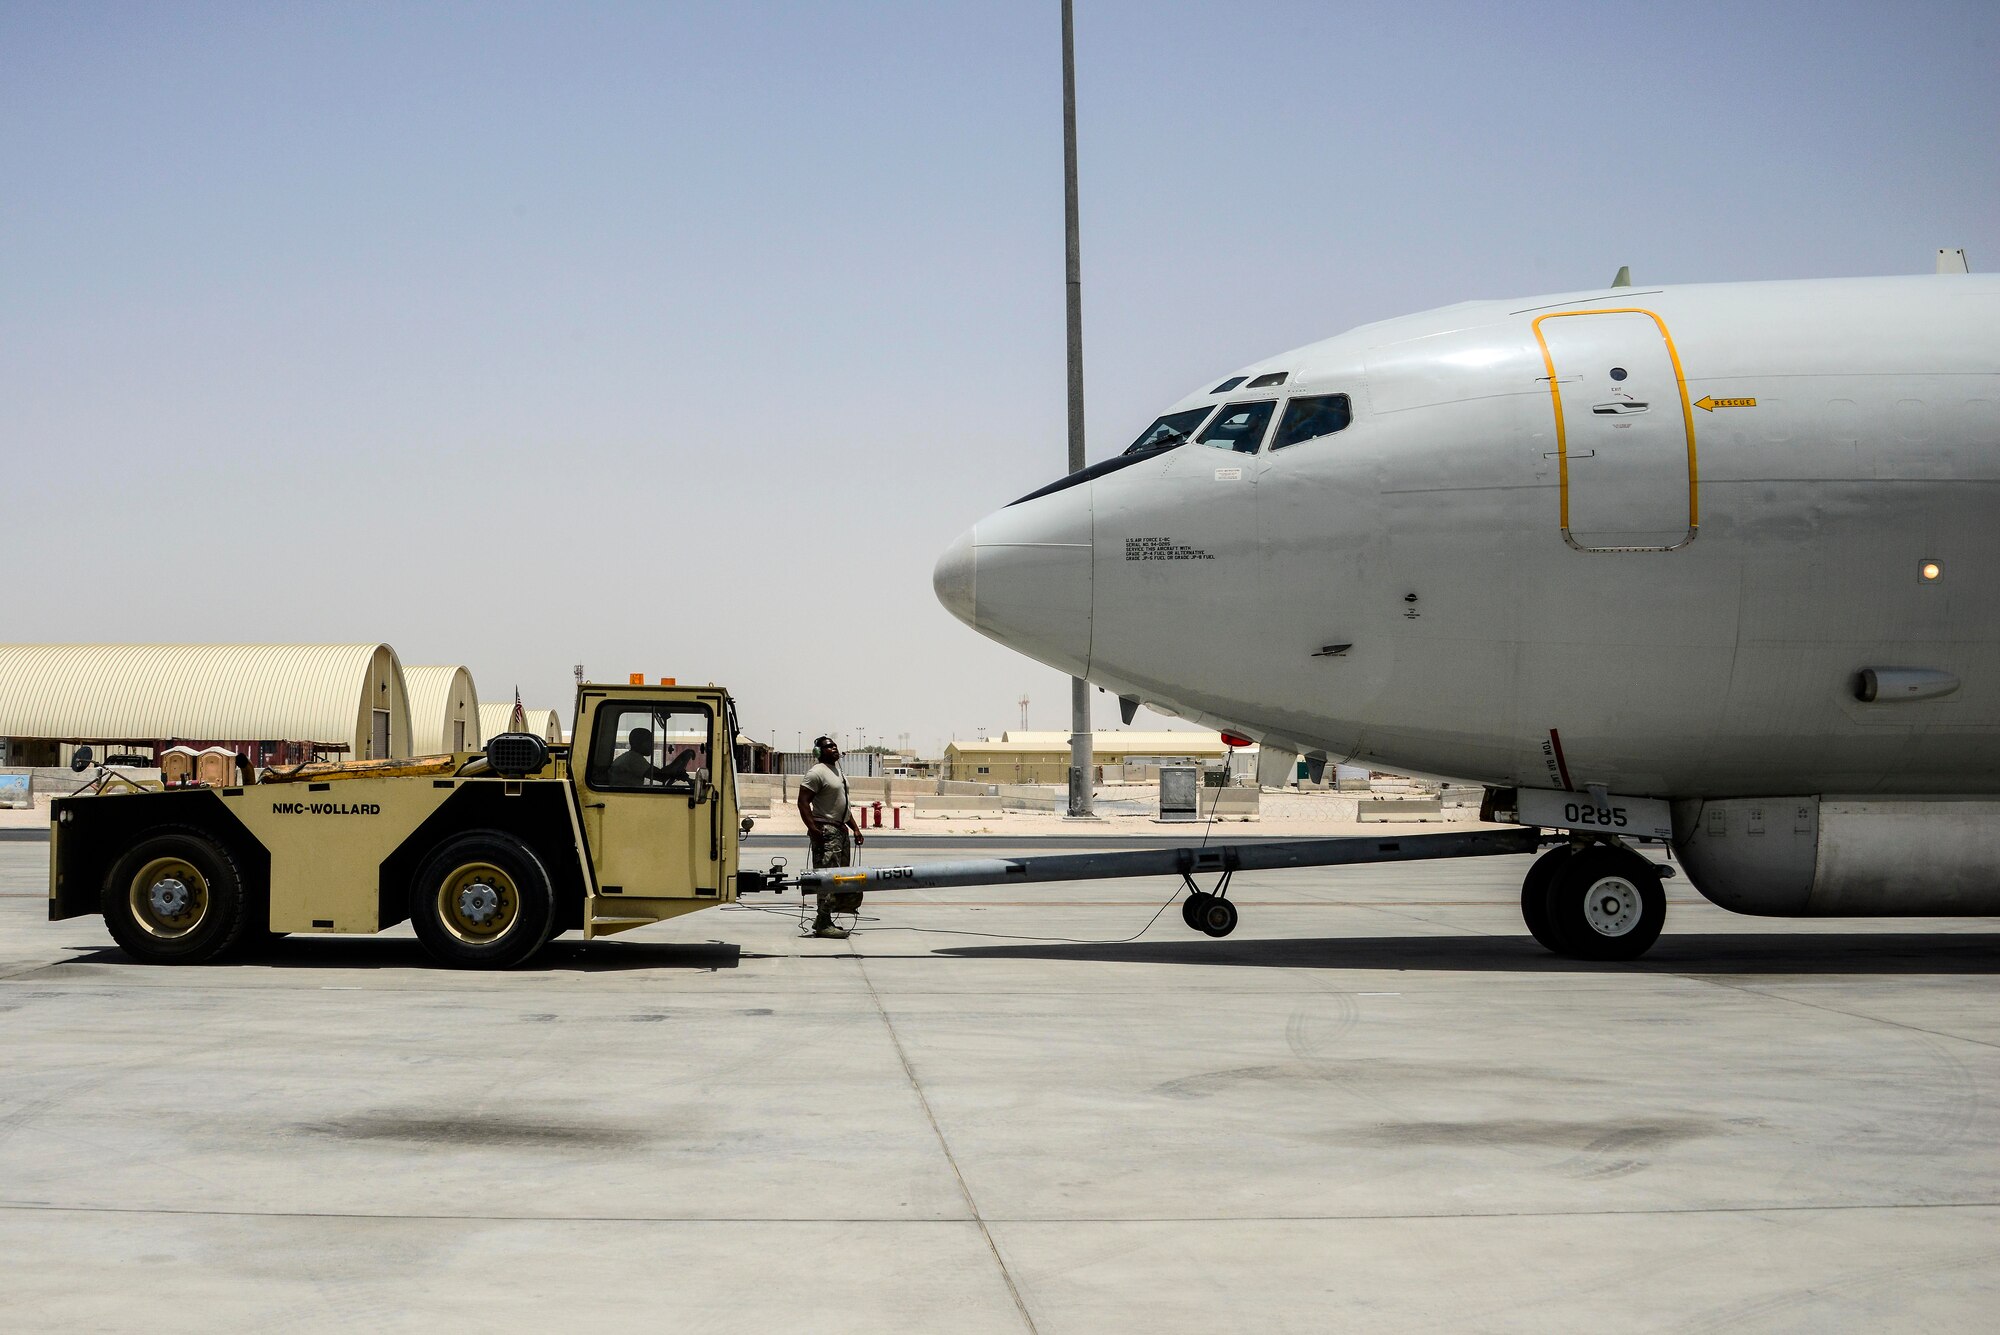 Airman 1st Class Strickland, 7th Air Mobility Unit crew chief, pushes back an E-8C Joint Surveillance Target Attack Radar Systems into its respective parking spot after completing a mission June 7, 2016, at Al Udeid Air Base, Qatar, using a “Uke” MB-2 Tow Tractor. The aircraft contains a radar and computer subsystems that can gather and display detailed battlefield information on ground forces. It can support the full spectrum of roles and missions ranging from peacekeeping operations to major theater war. (U.S. Air Force photo/Senior Airman Janelle Patiño/Released)